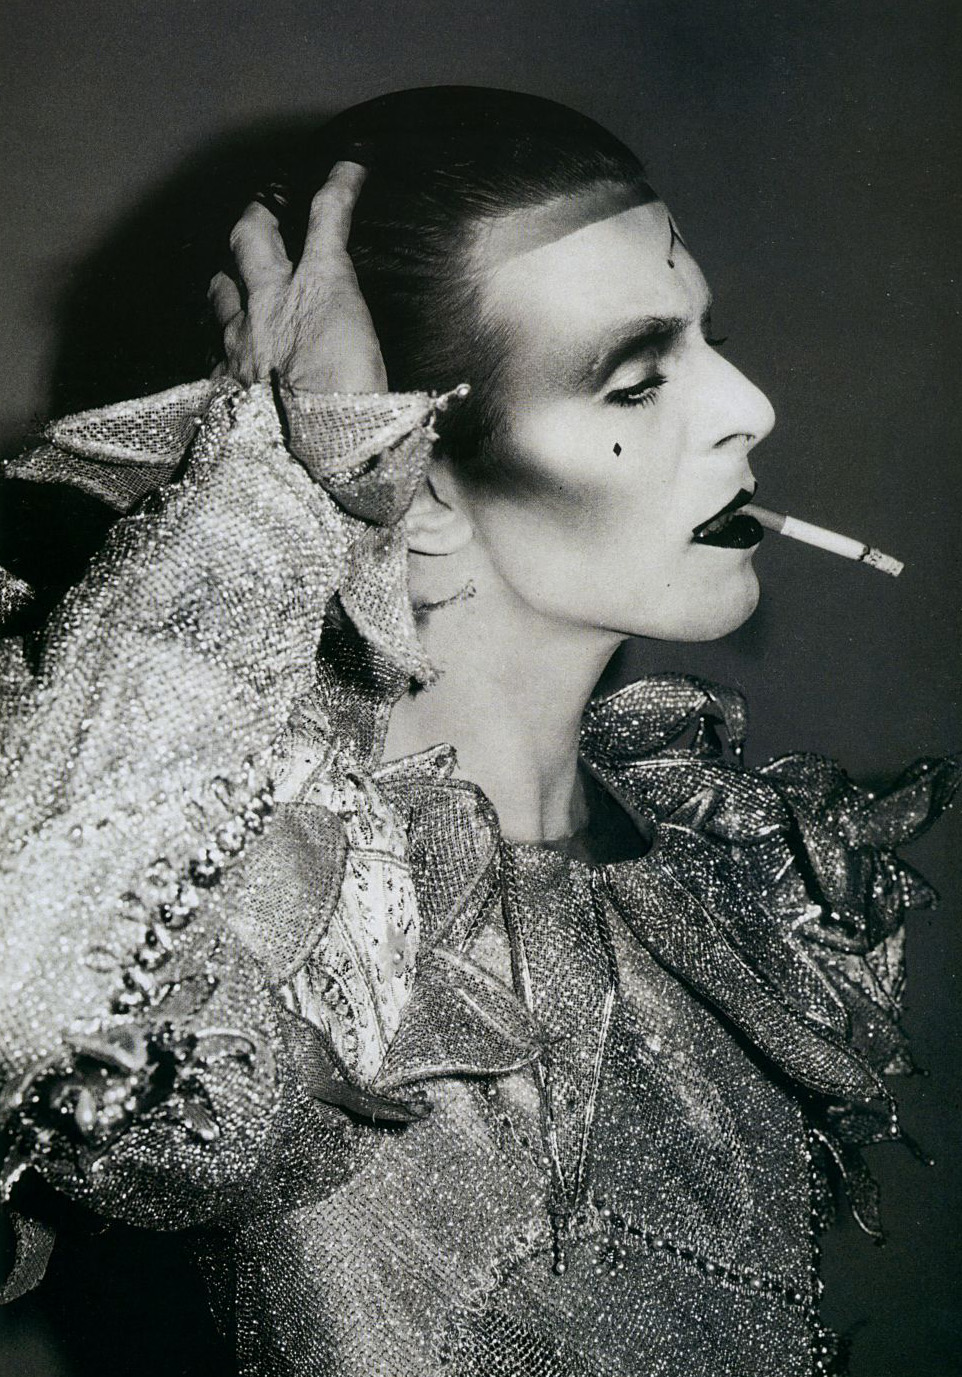 David Bowie photo gallery - high quality pics of David Bowie | ThePlace